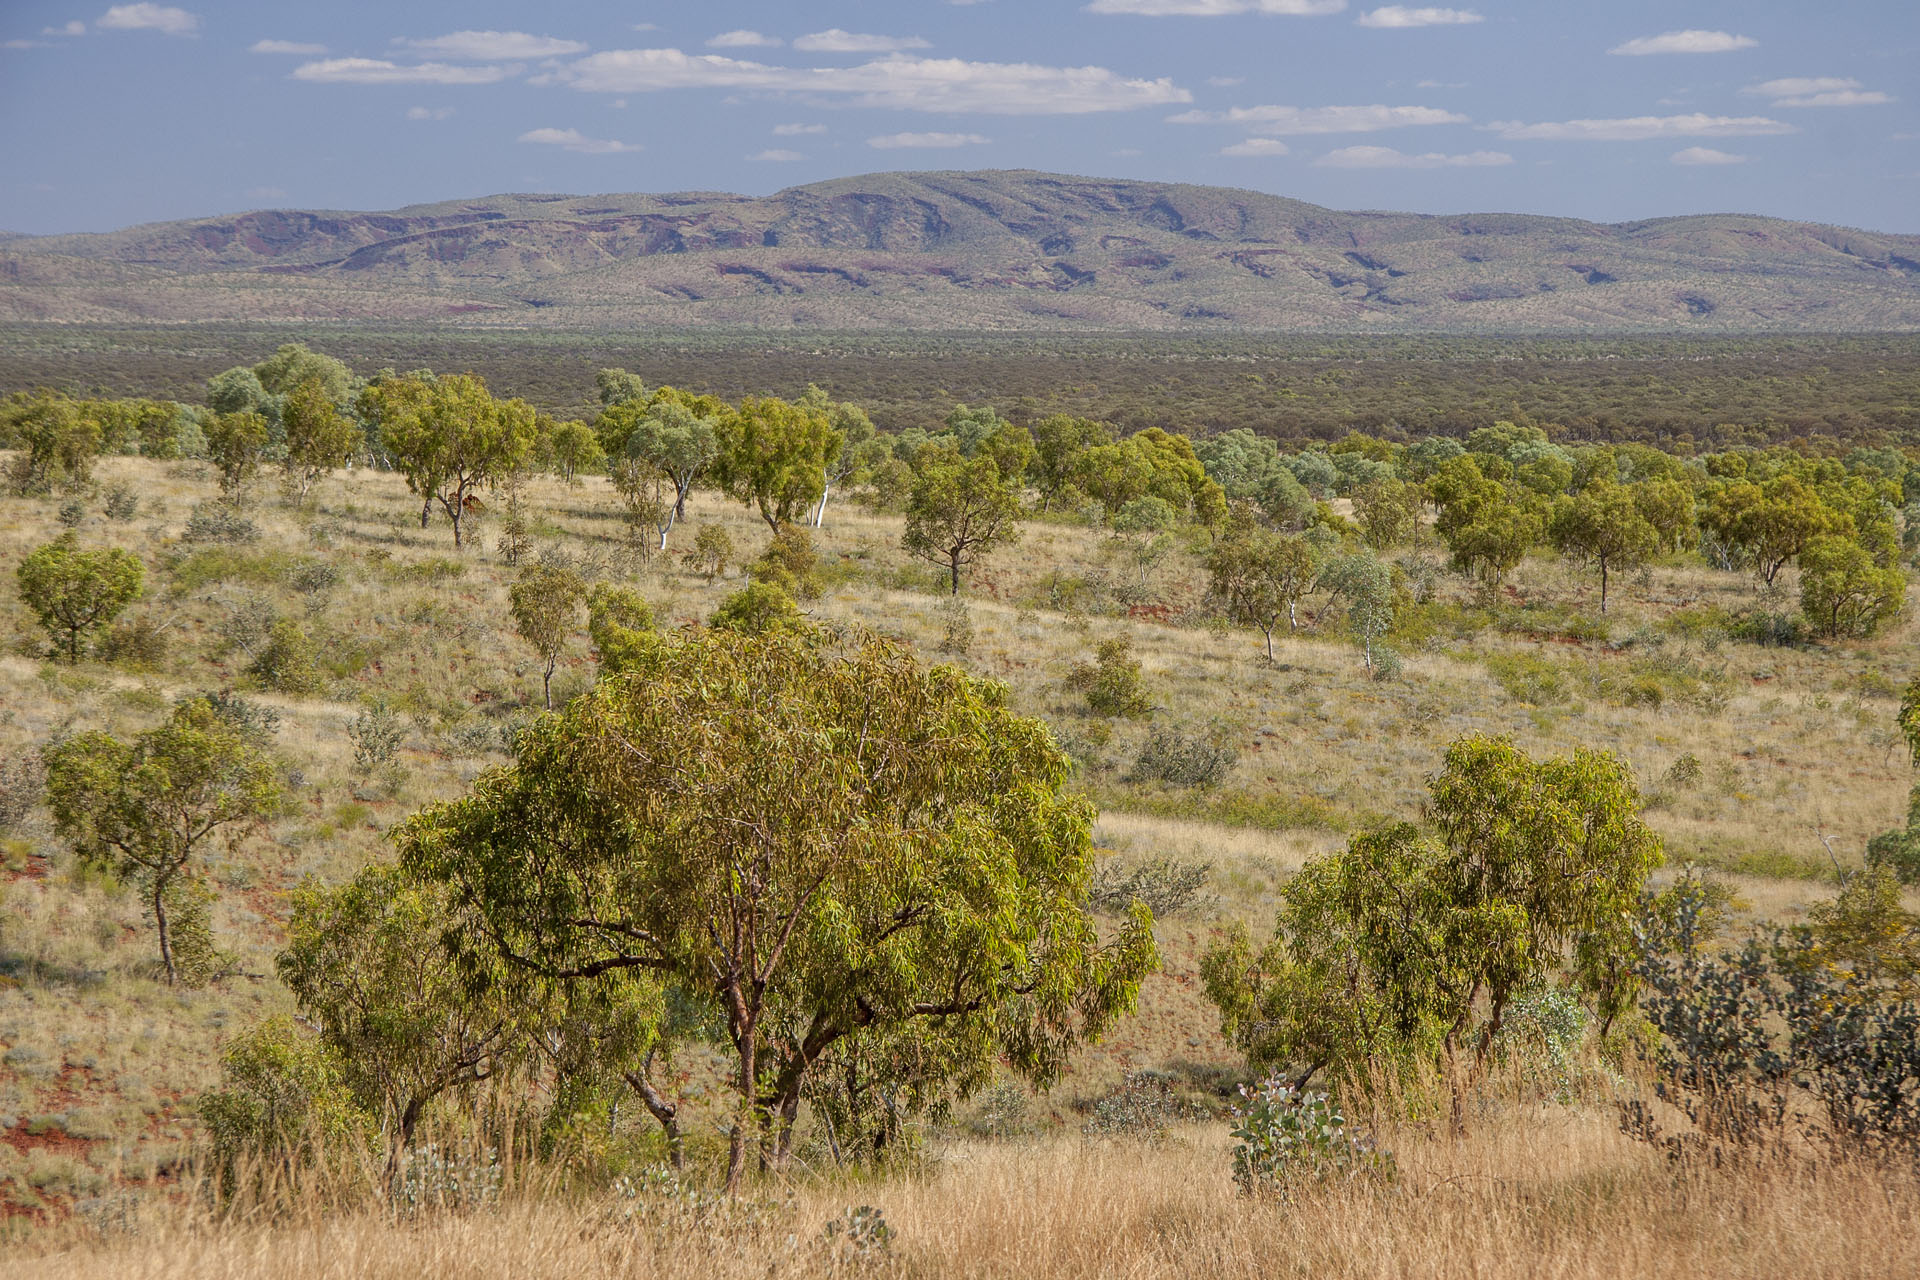 Hamersley Ranges in the distance.